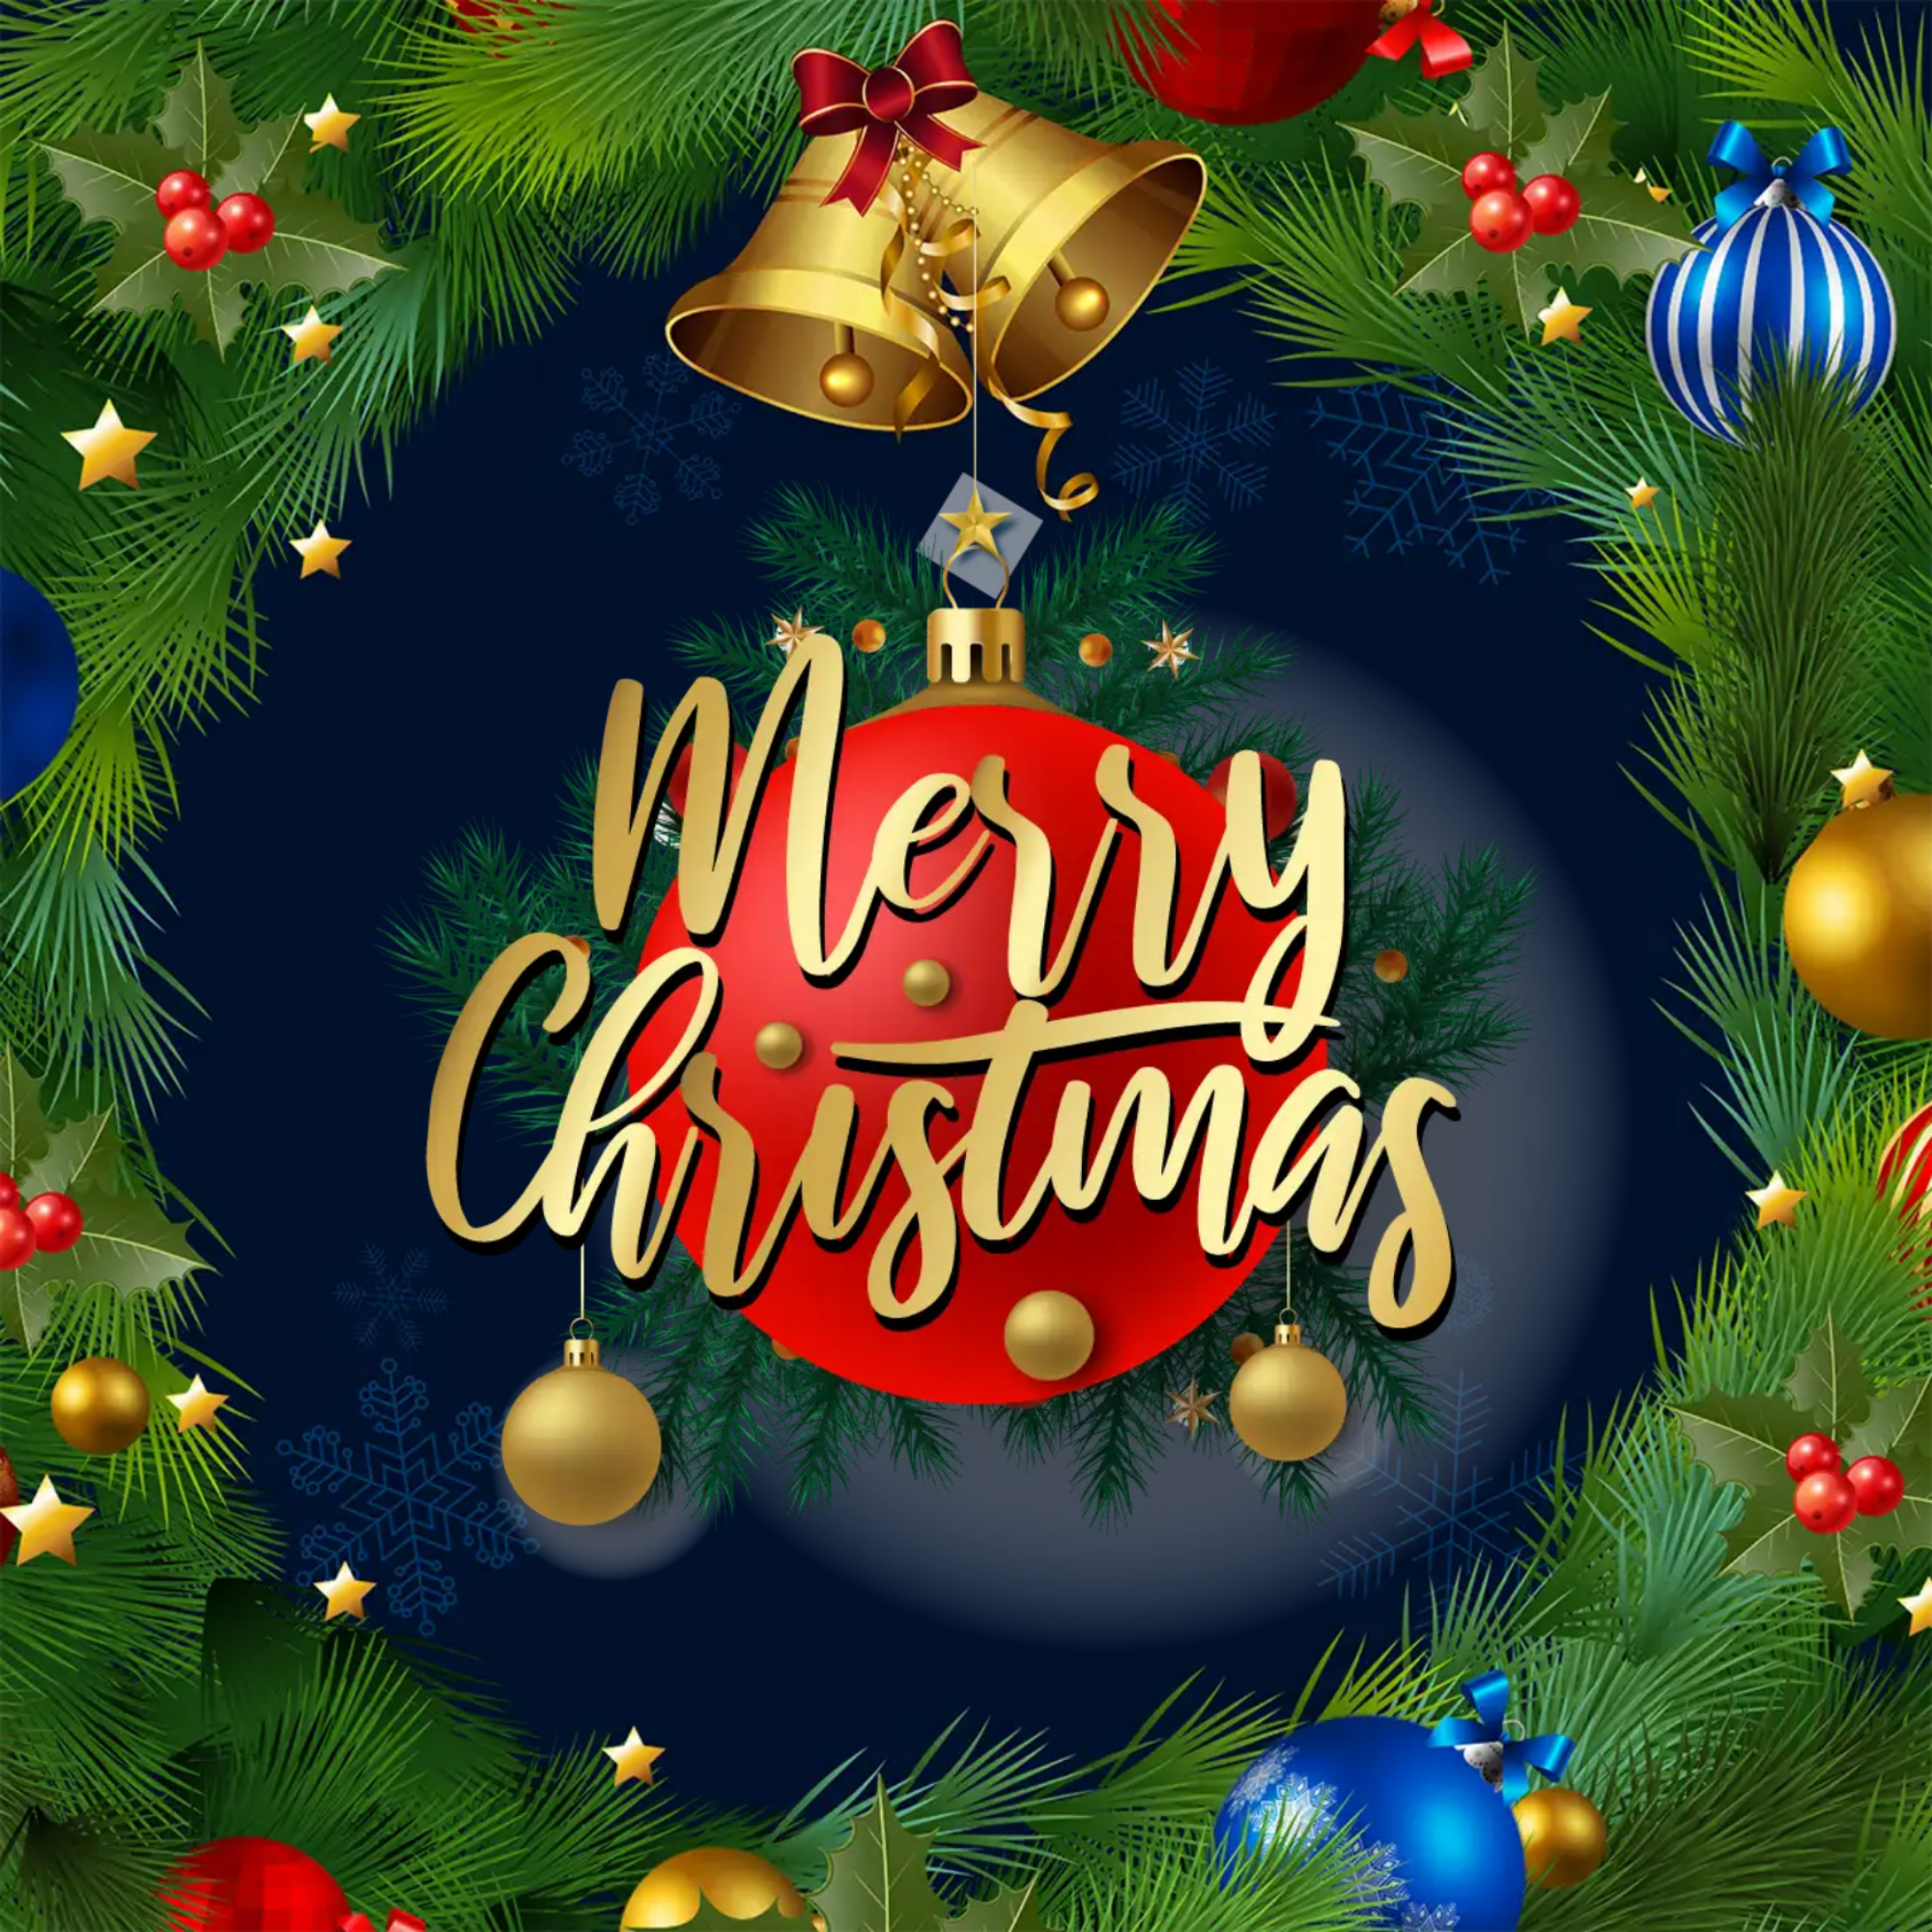 New Merry Christmas Images 2022 HD Download